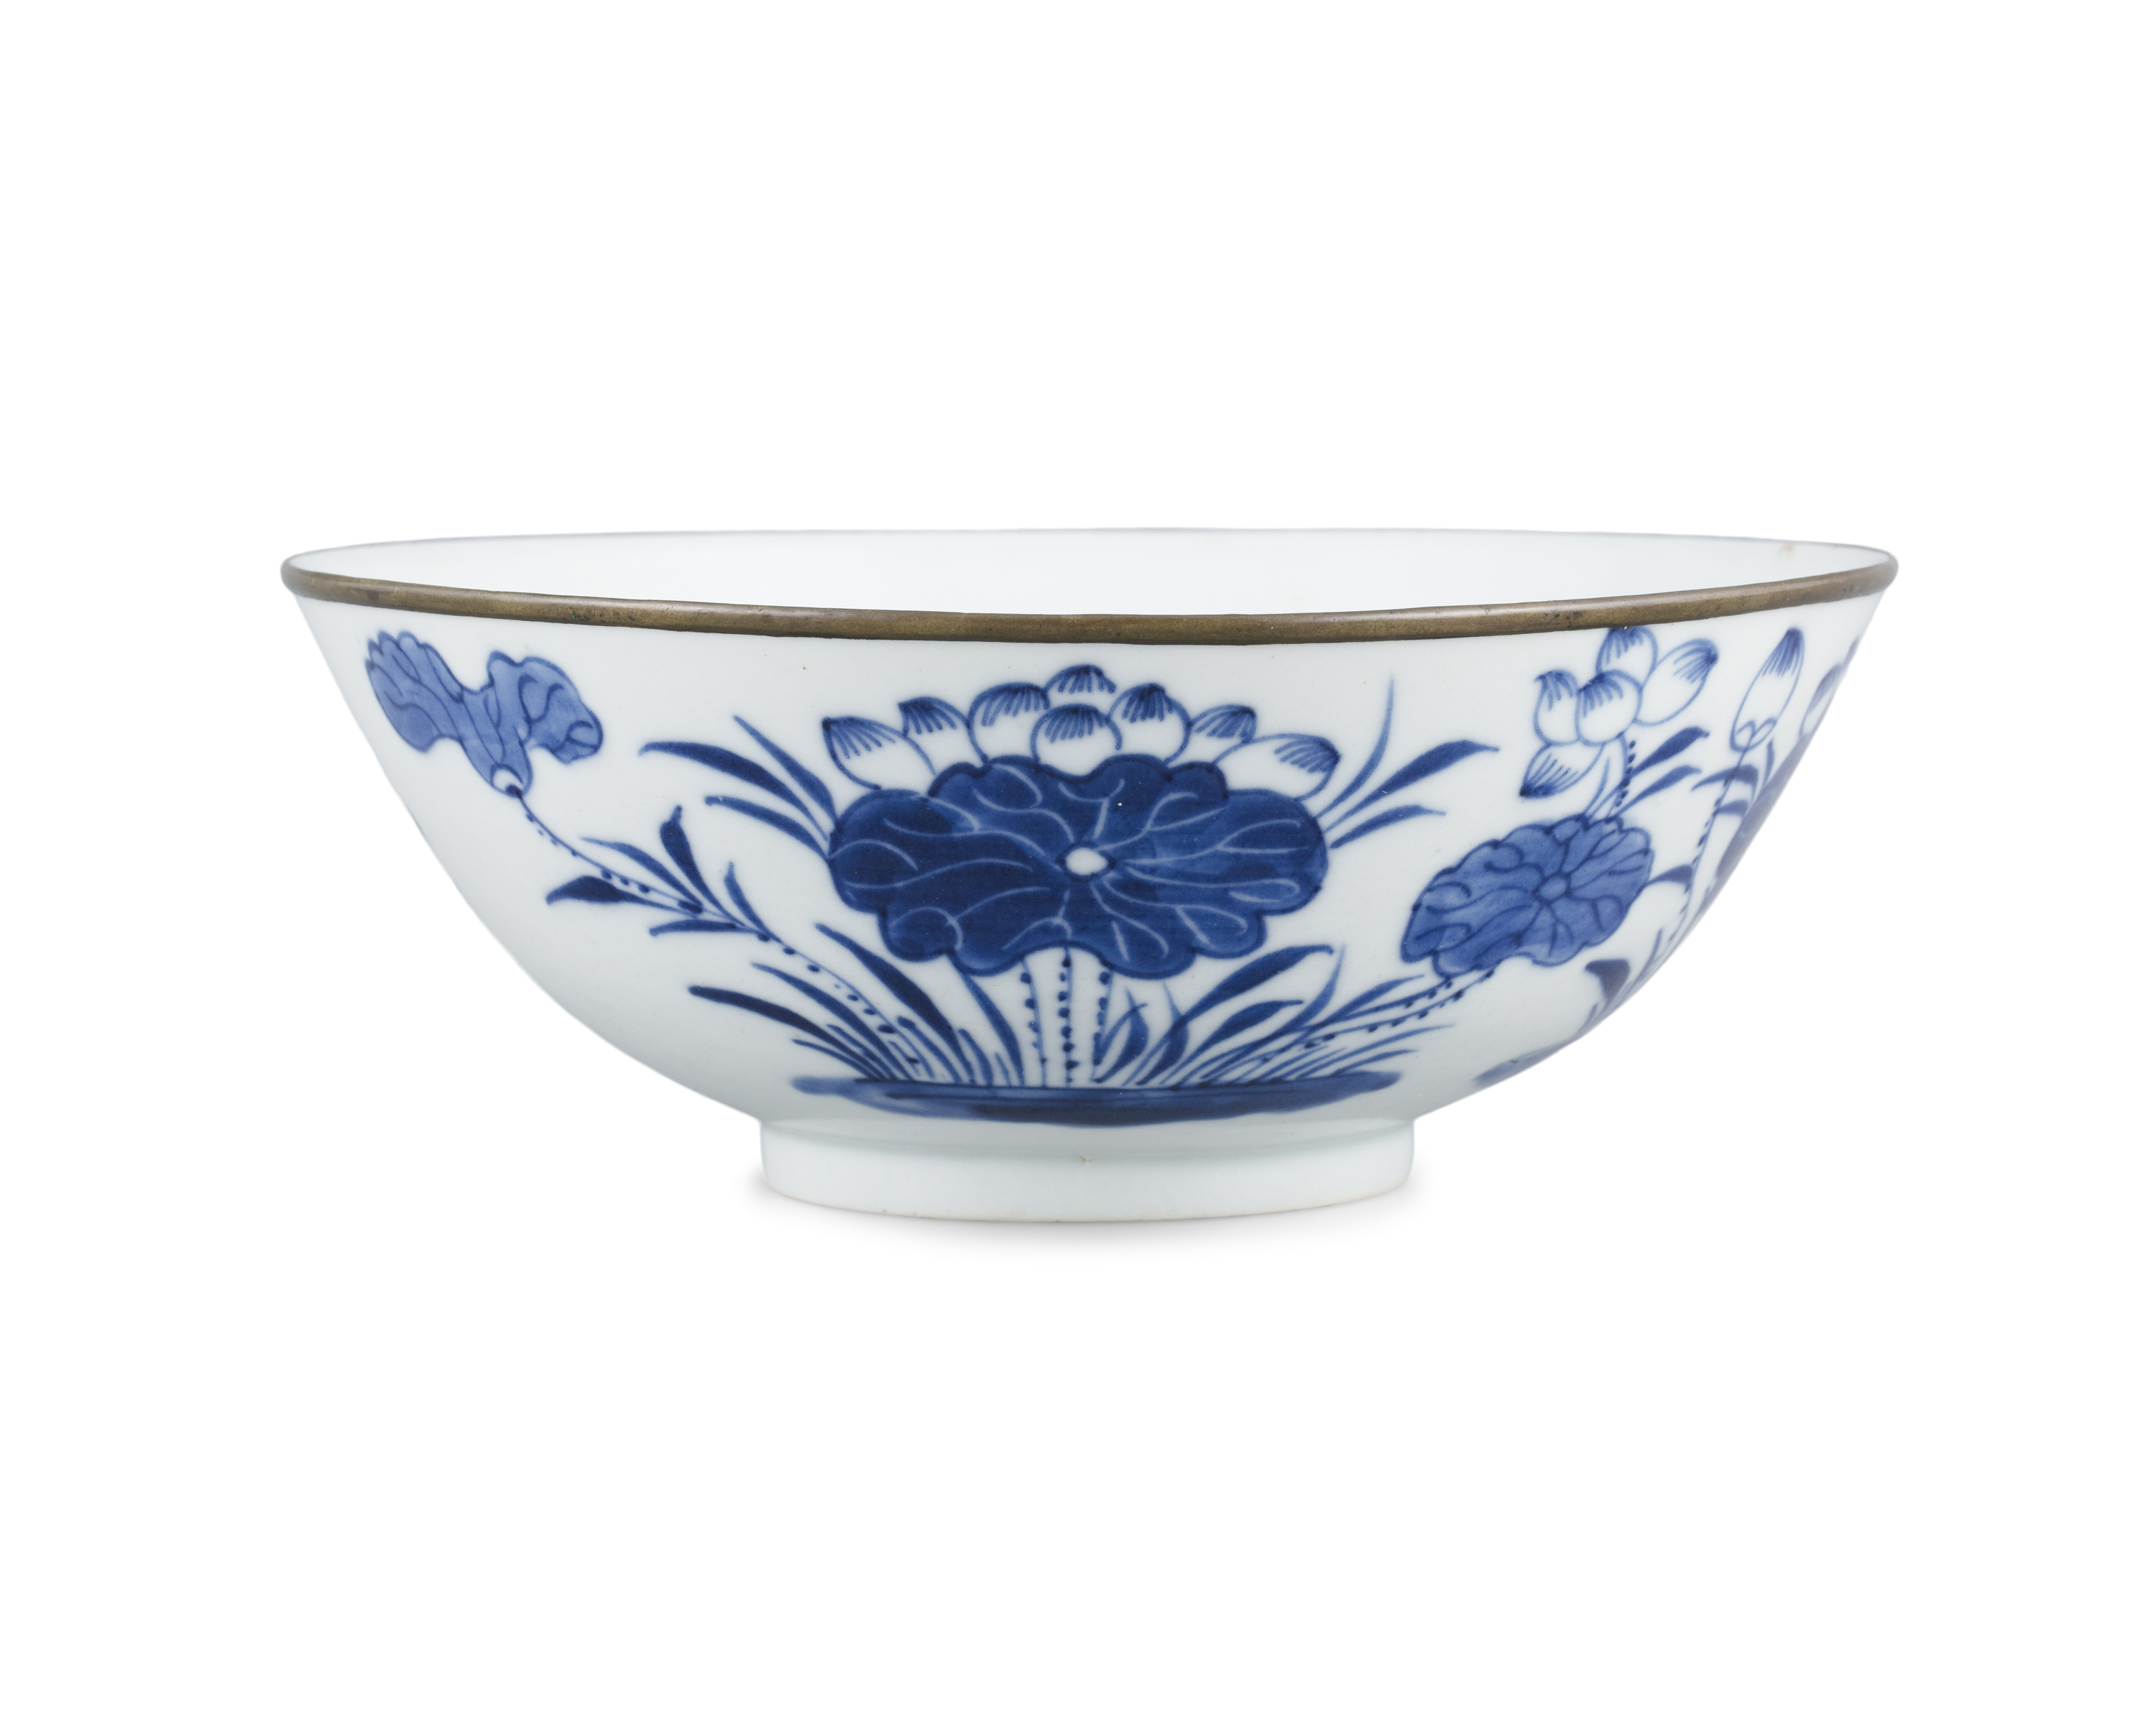 A BLEU DE HUE PORCELAIN BOWL ‘CRAB AND LOTUS POND’ BOWL INSCRIBED WITH THE MARK NGOẠN NGỌC 玩玉 - Image 3 of 18